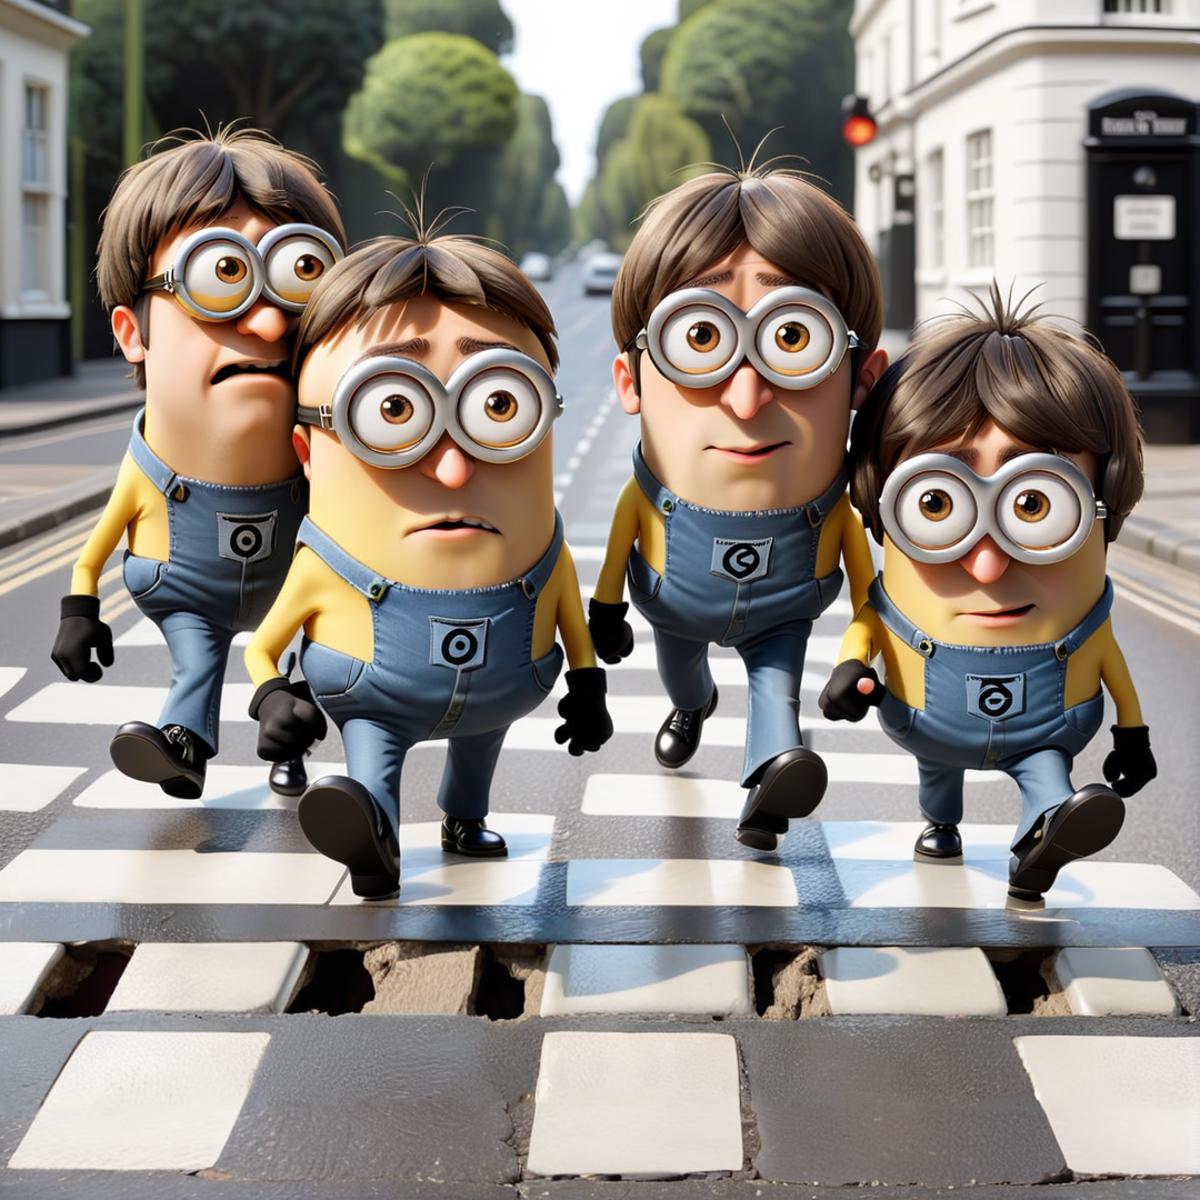 Four Minion Characters Crossing a Crosswalk